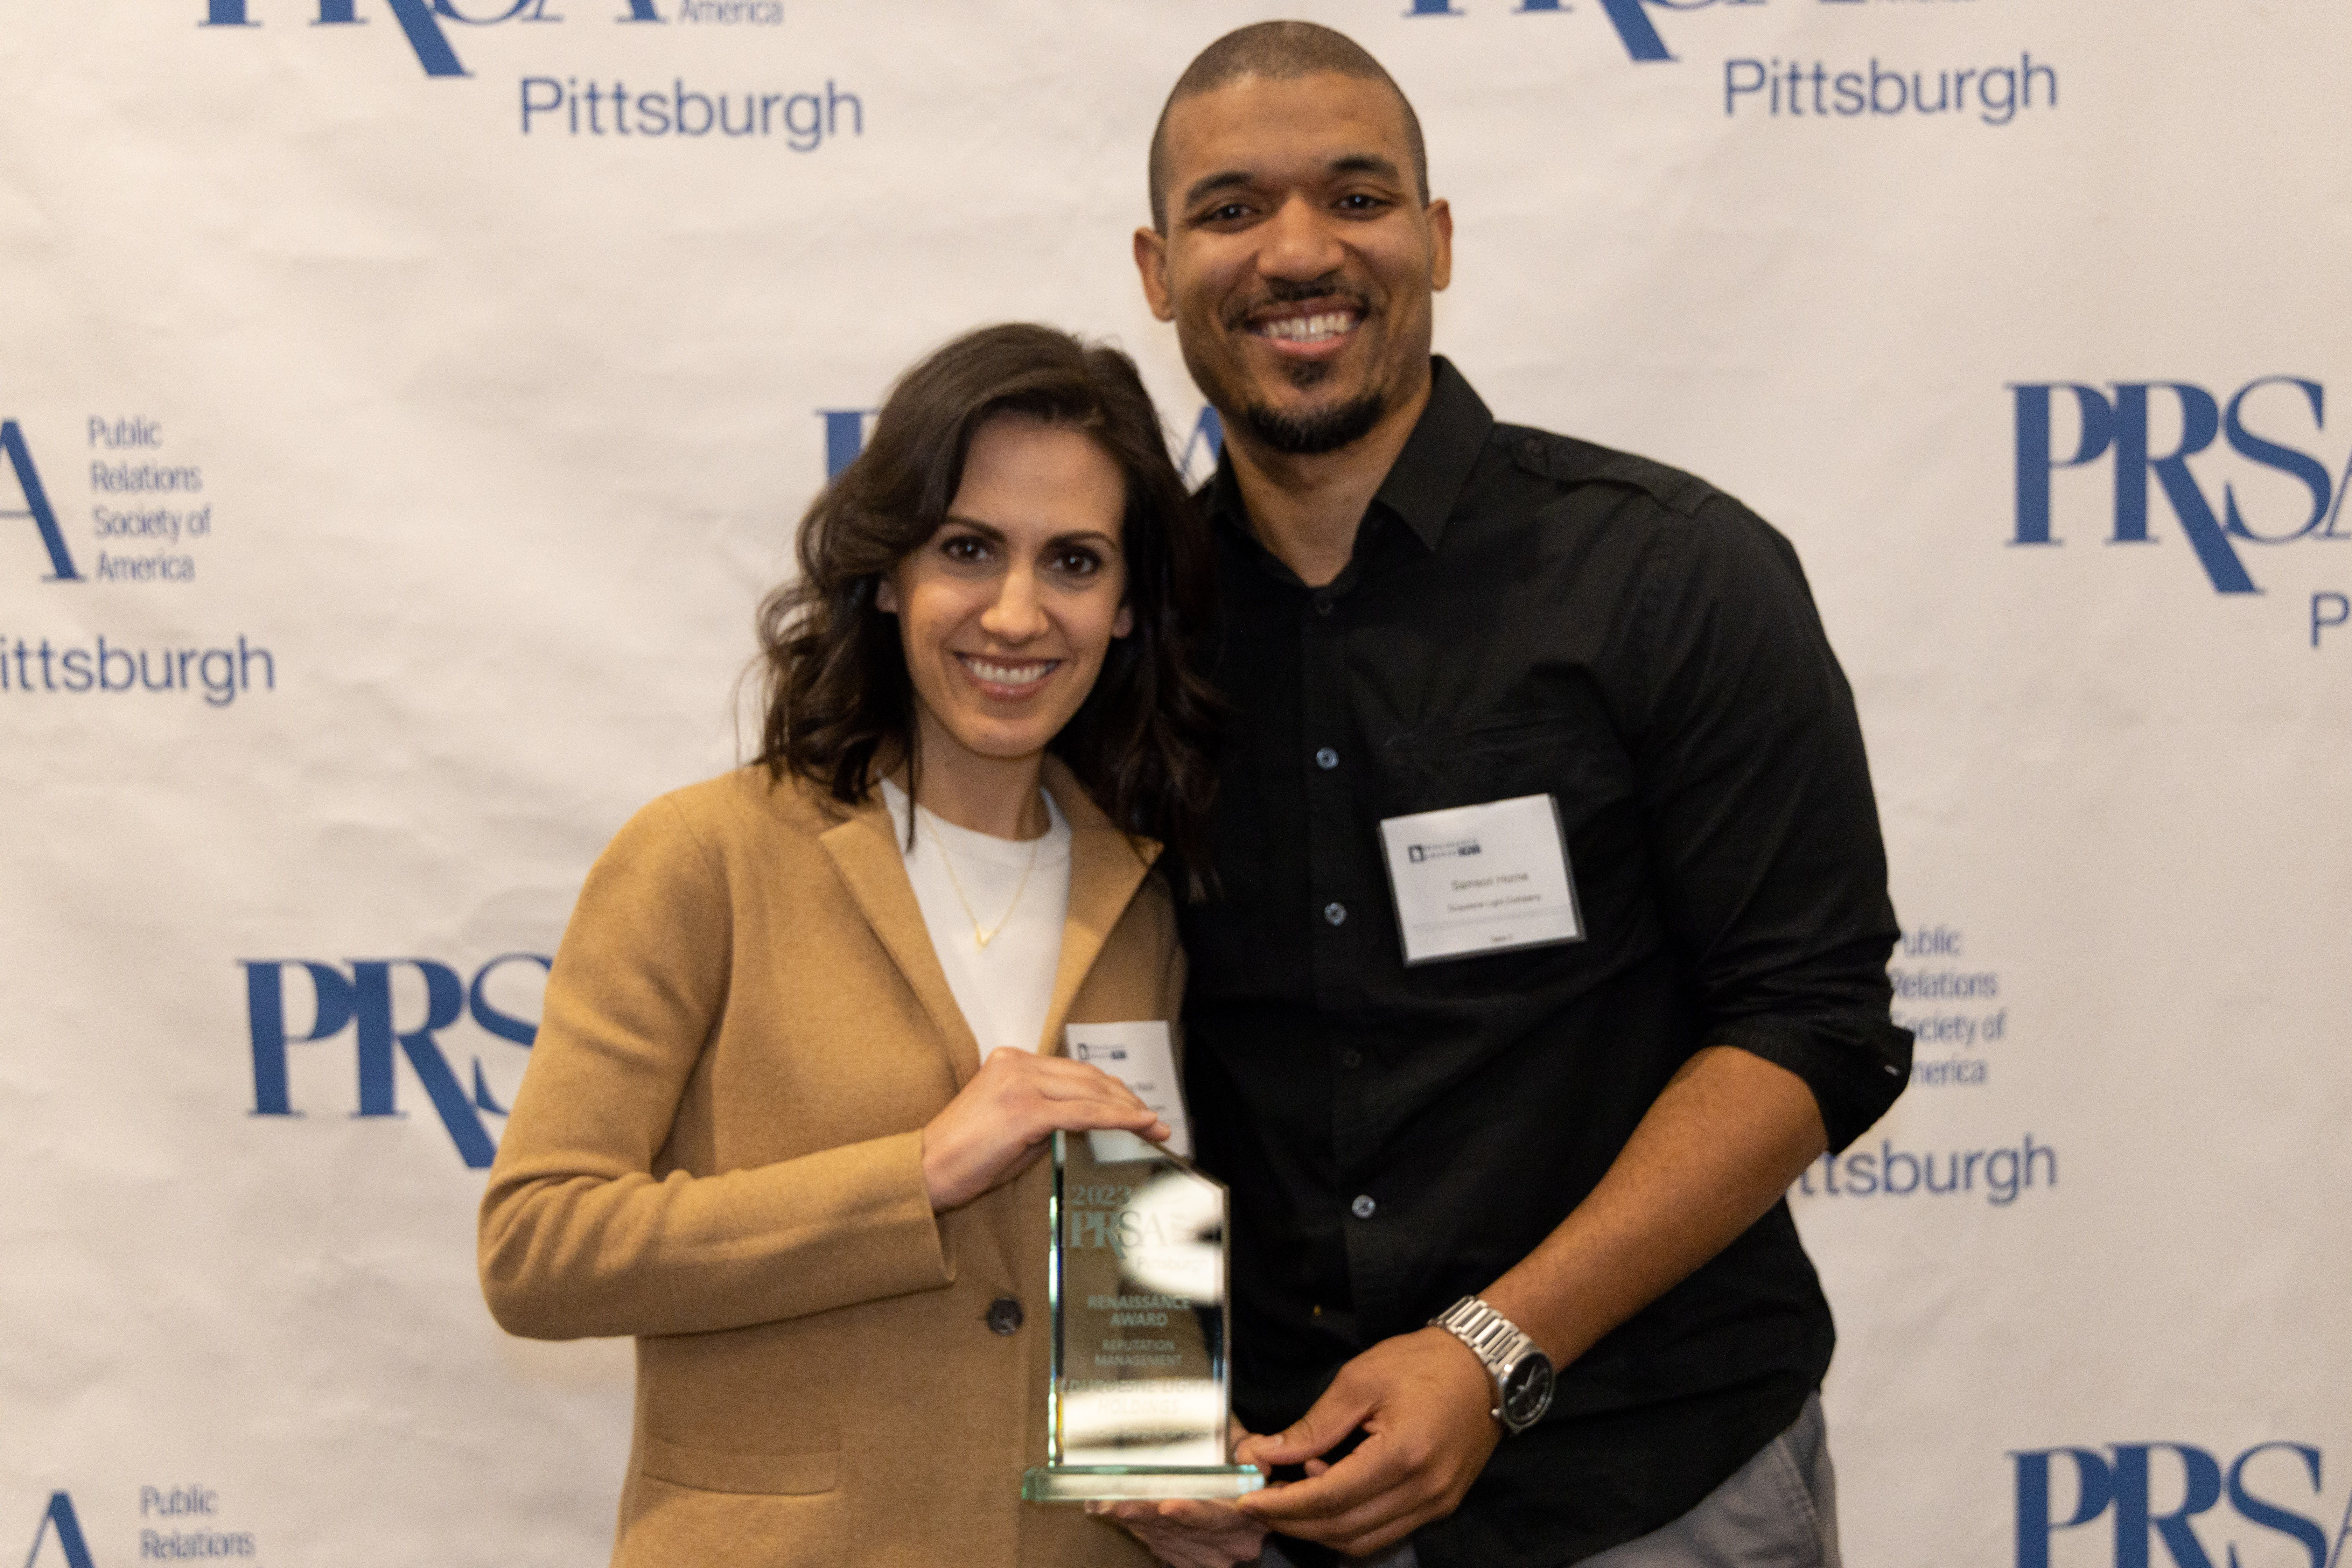 Duquesne Light Company's External Communications Manager Ashley Macik (left) and Associate Manager of Digital Media Samson Horne were part of the team that won "Best in Show" during the 2023 PRSA Pittsburgh Renaissance Awards at the Carnegie Science Center on Jan. 26.